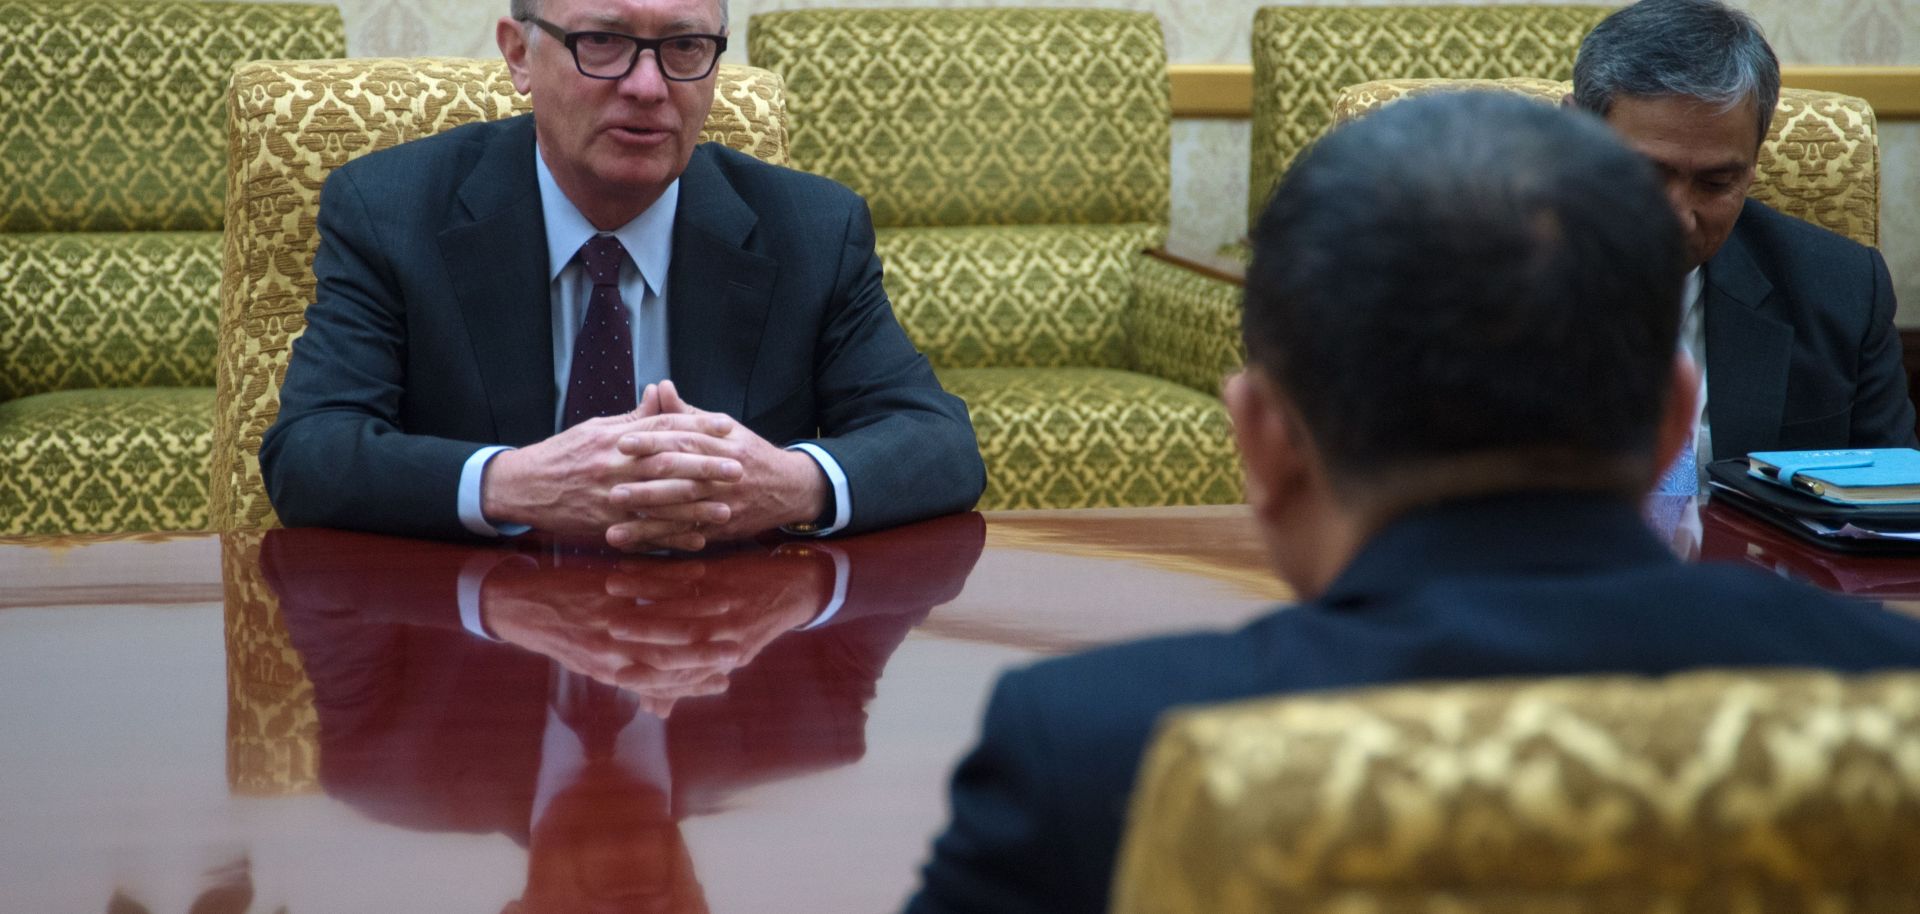 U.N. Under-Secretary-General for Political Affairs Jeffrey Feltman (L), met in Pyongyang with a senior member of the North Korean administration Dec. 7, 2017, marking the first such visit by a U.N. diplomat in seven years.